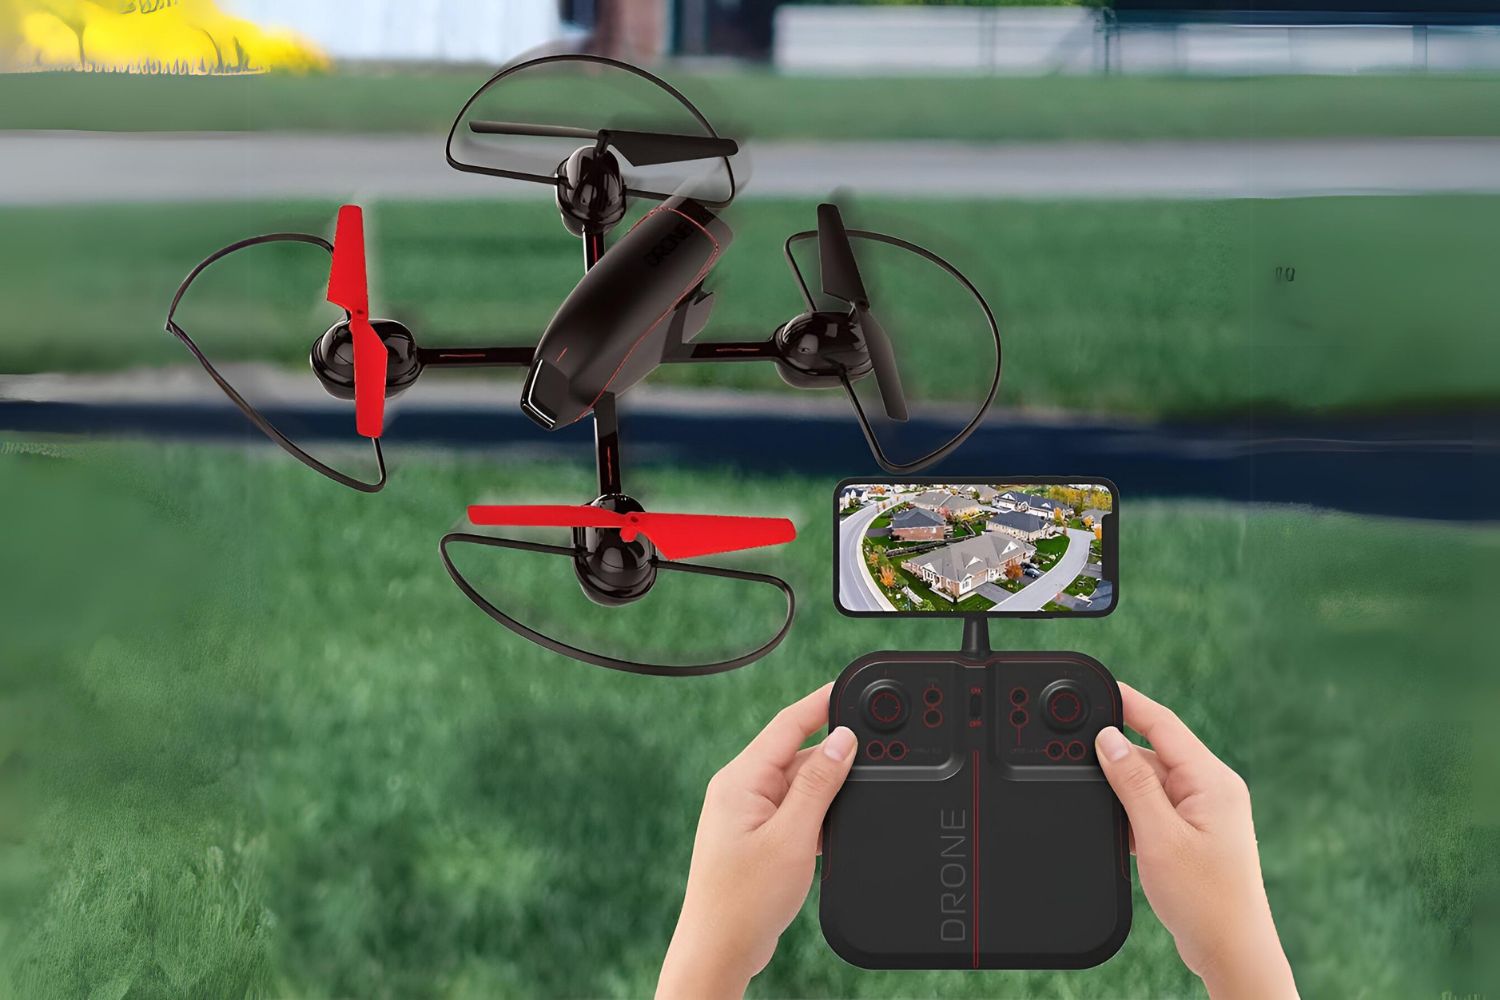 Which App To Download For The Sharper Image DX-5 Camera Drone